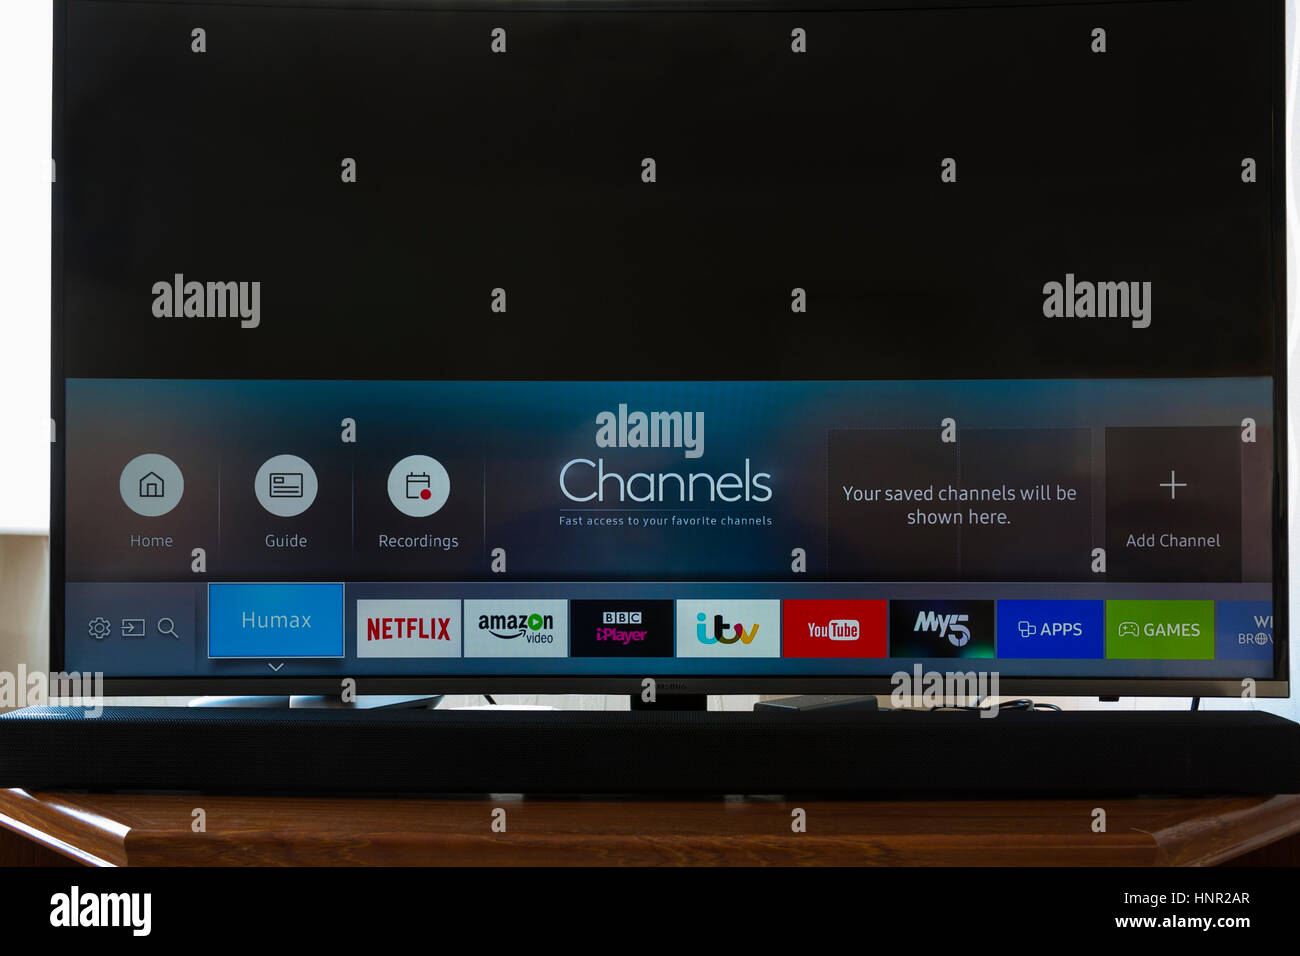 Ultra Hd Led Smart Tv Screen Showing The Many Options Available For Downloading Media For Television Viewers Stock Photo Alamy